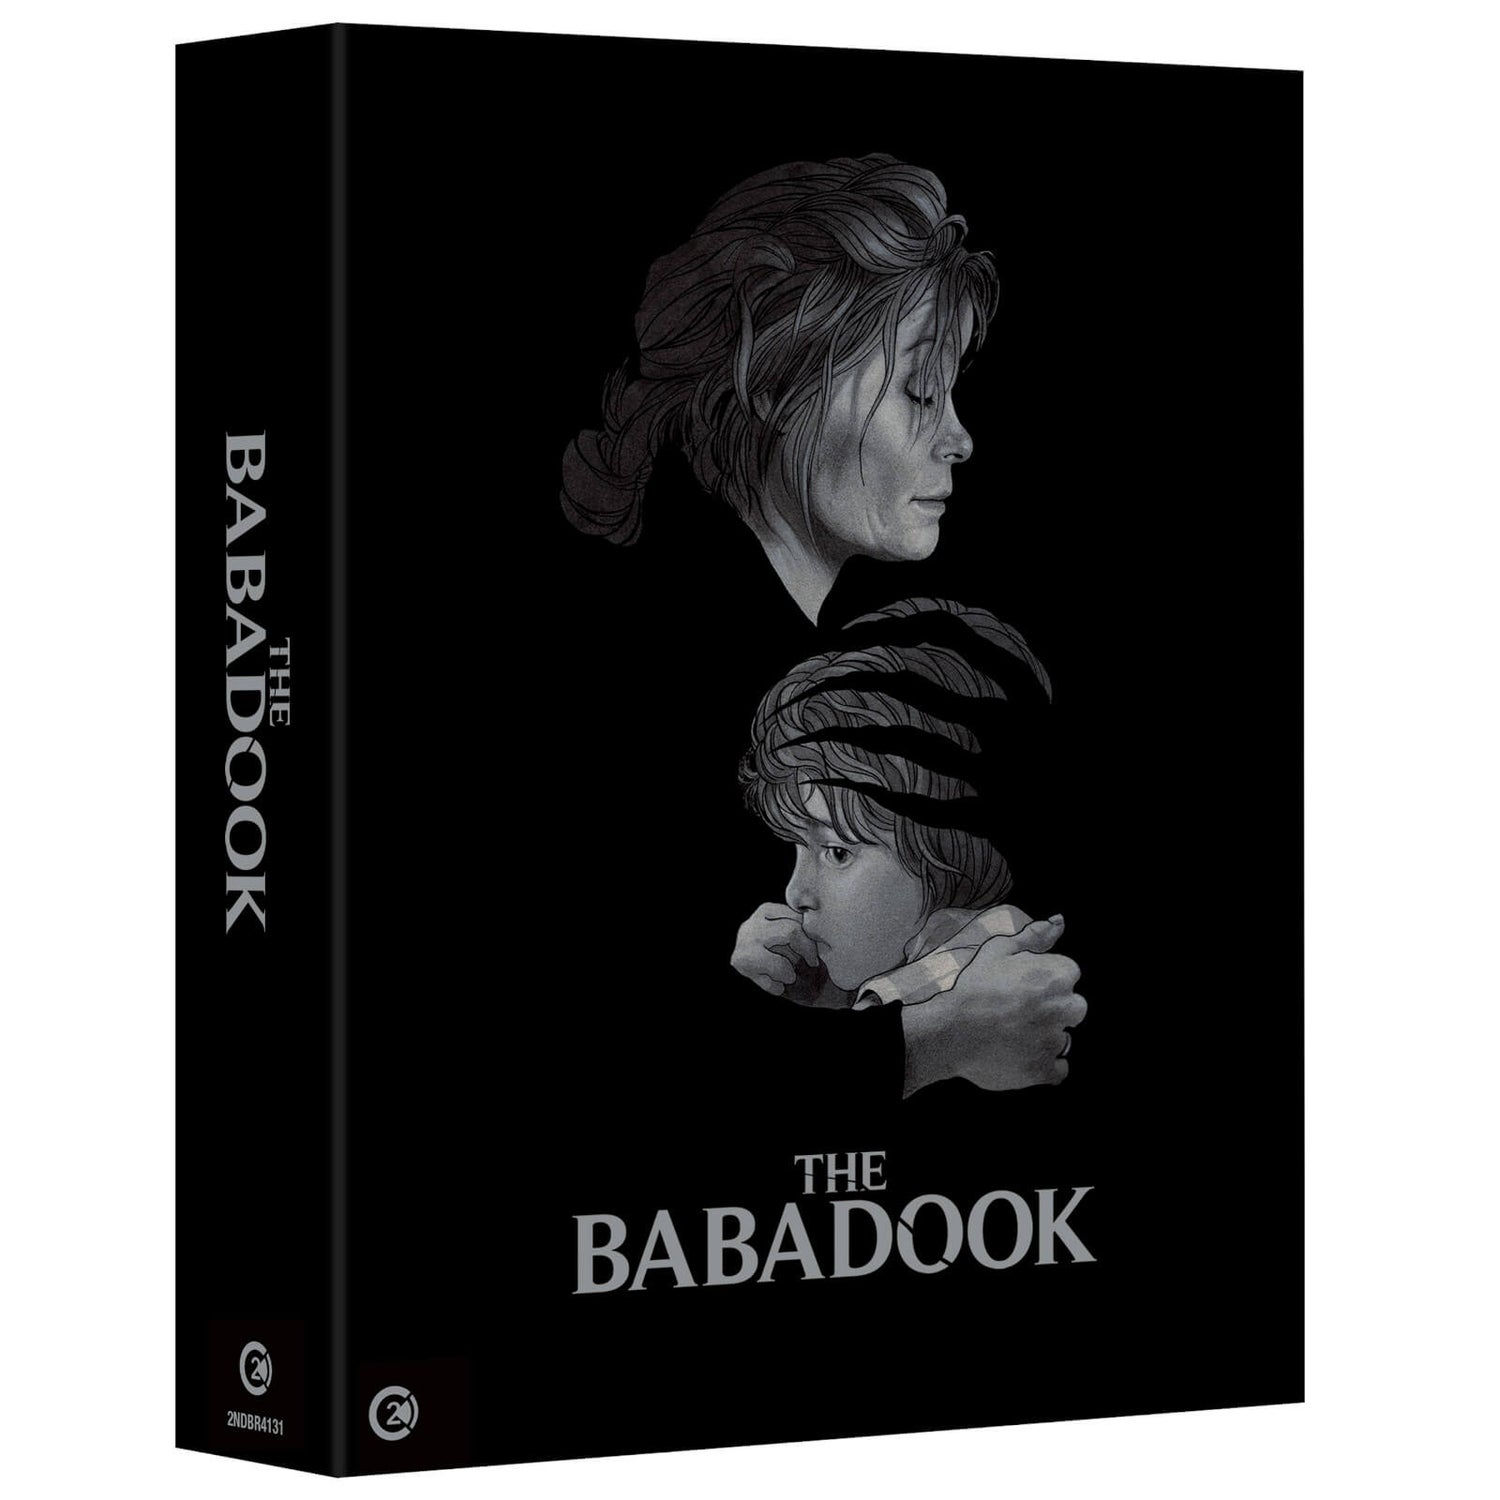 The Babadook - Limited Edition 4K Ultra HD